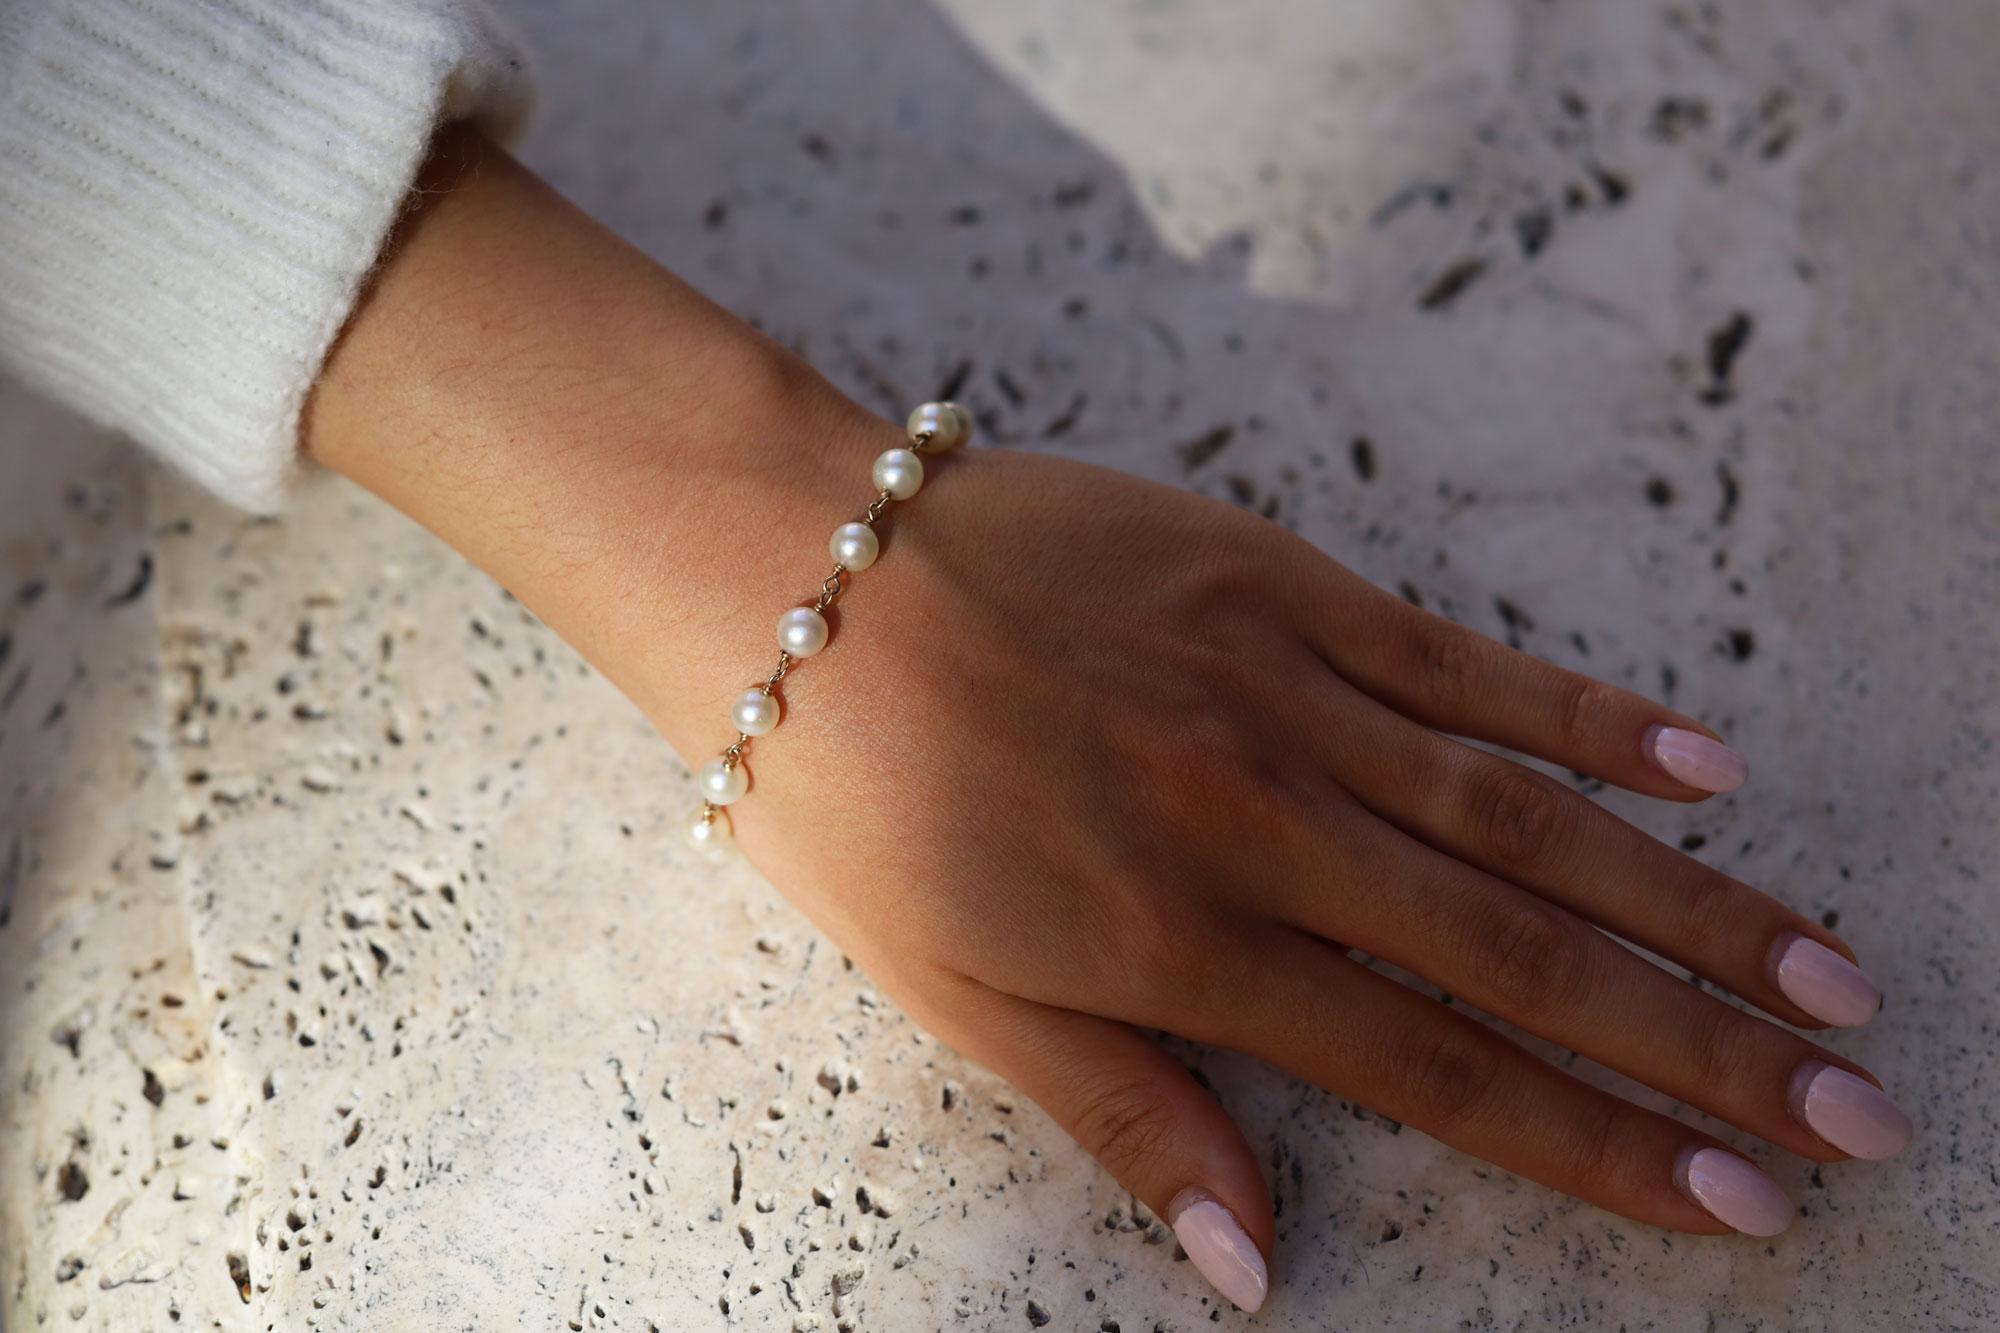 This stunning bracelet features 14 luminescent cultured Akoya salt water pearls linked along a 14k yellow gold chain. Achieve a lavish look at a fraction of the cost of the Elsa Peretti for Tiffany bracelet. Crafted with sustainability in mind, each